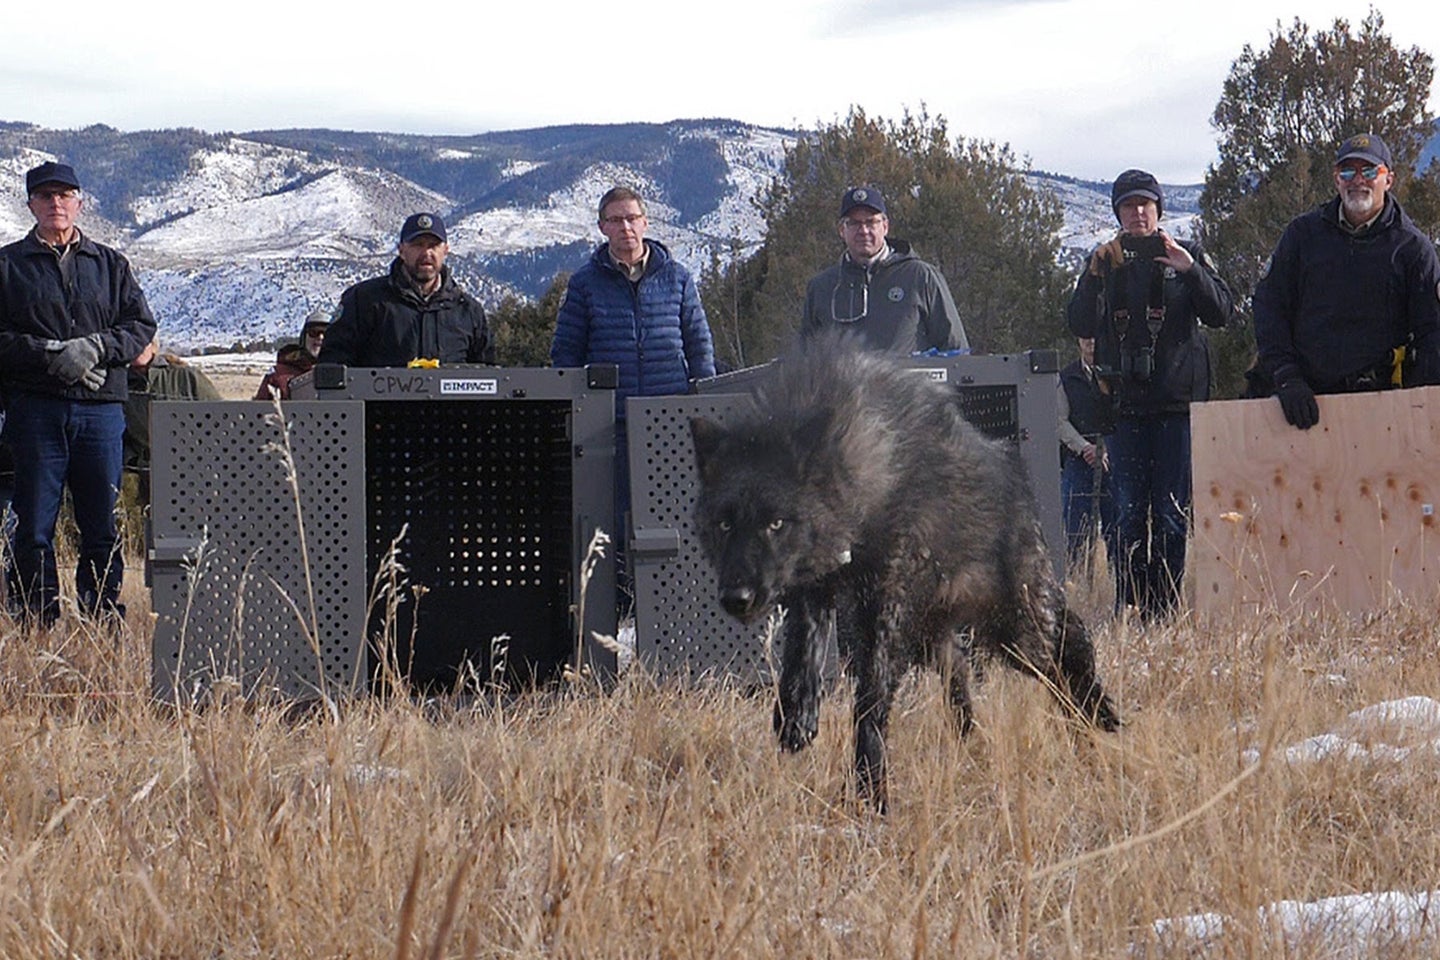 A captured wolf bounds out of its cage during a release ceremony in Colorado.